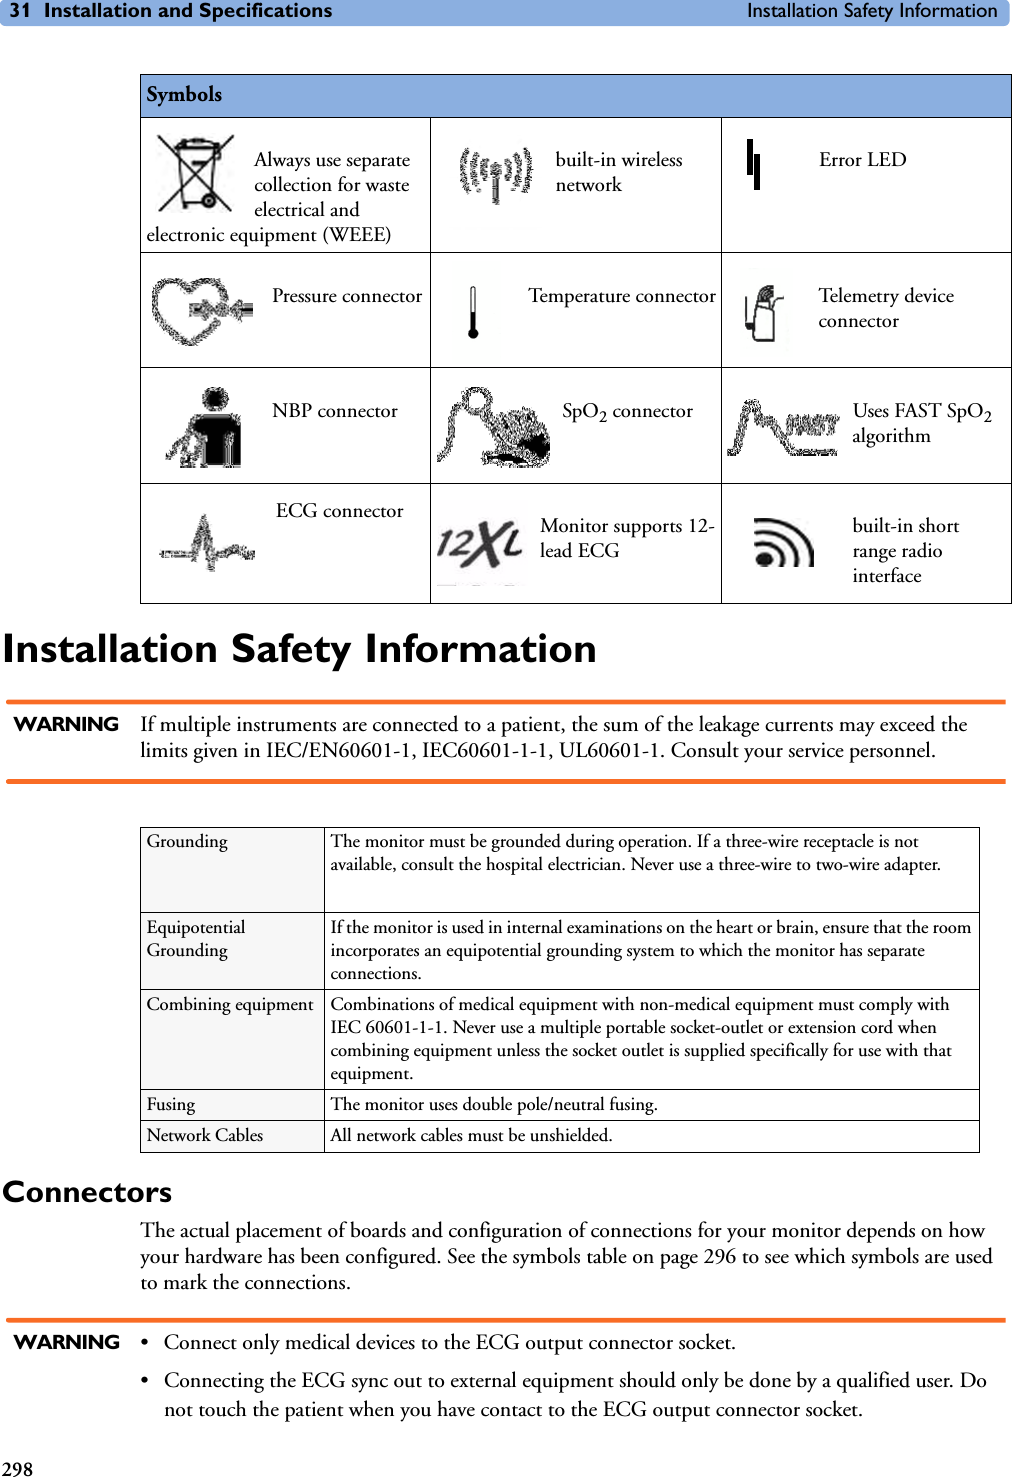 31 Installation and Specifications Installation Safety Information298Installation Safety InformationWARNING If multiple instruments are connected to a patient, the sum of the leakage currents may exceed the limits given in IEC/EN60601-1, IEC60601-1-1, UL60601-1. Consult your service personnel.ConnectorsThe actual placement of boards and configuration of connections for your monitor depends on how your hardware has been configured. See the symbols table on page 296 to see which symbols are used to mark the connections.WARNING • Connect only medical devices to the ECG output connector socket.• Connecting the ECG sync out to external equipment should only be done by a qualified user. Do not touch the patient when you have contact to the ECG output connector socket. Always use separate collection for waste electrical and electronic equipment (WEEE) built-in wireless networkError LEDPressure connector Temperature connector Telemetry device connectorNBP connector SpO2 connector Uses FAST SpO2 algorithmECG connector Monitor supports 12-lead ECGbuilt-in short range radio interfaceSymbolsGrounding The monitor must be grounded during operation. If a three-wire receptacle is not available, consult the hospital electrician. Never use a three-wire to two-wire adapter.Equipotential GroundingIf the monitor is used in internal examinations on the heart or brain, ensure that the room incorporates an equipotential grounding system to which the monitor has separate connections. Combining equipment Combinations of medical equipment with non-medical equipment must comply with IEC 60601-1-1. Never use a multiple portable socket-outlet or extension cord when combining equipment unless the socket outlet is supplied specifically for use with that equipment.Fusing The monitor uses double pole/neutral fusing.Network Cables All network cables must be unshielded.